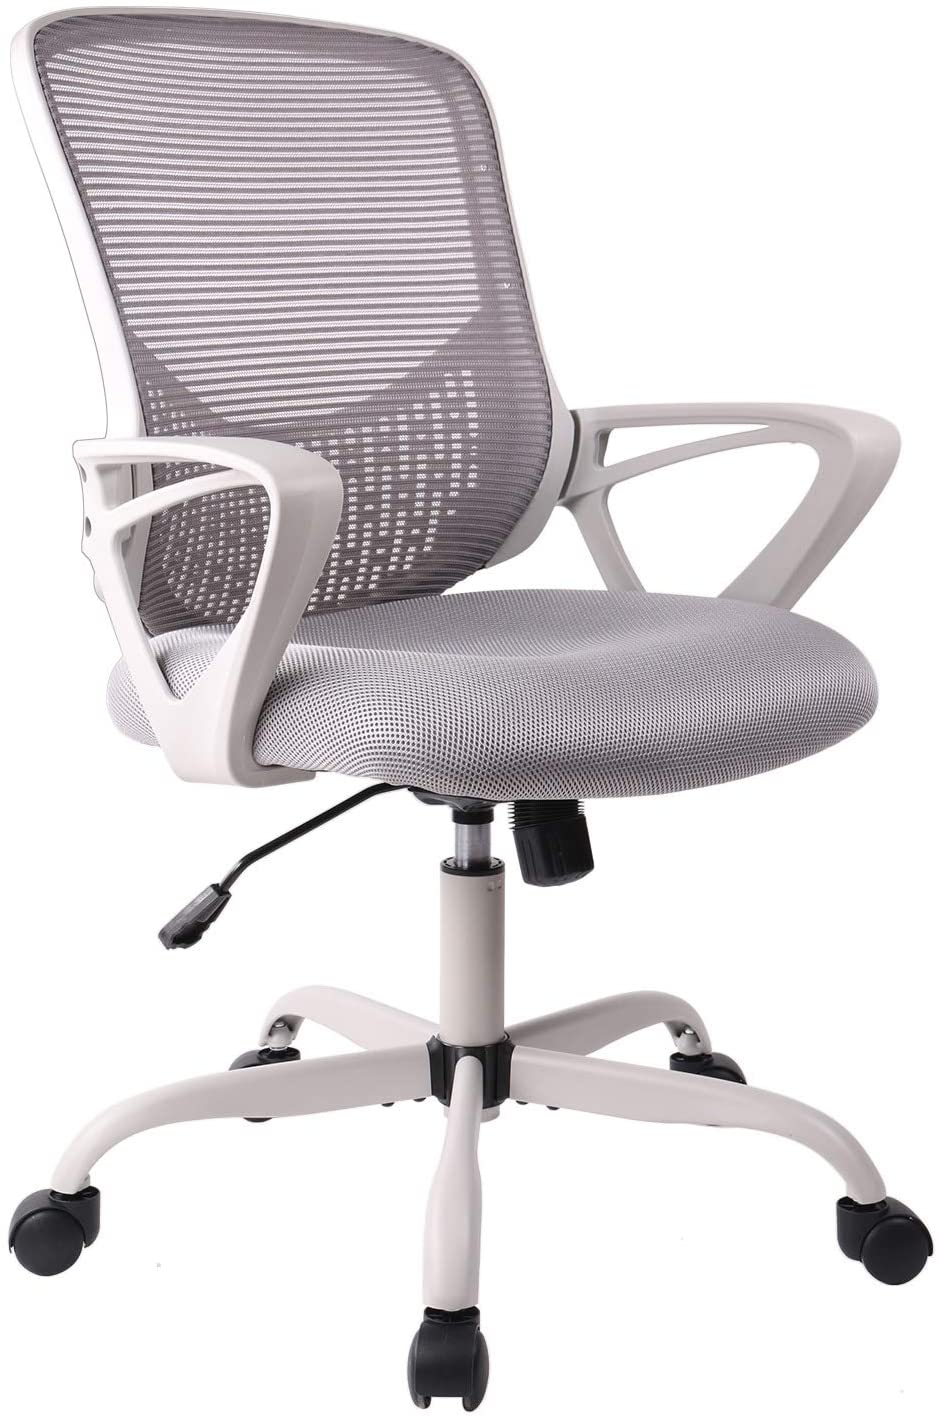 Best-Office-Chairs-7-White-Ergonomic-Desk-Chair - Walyou